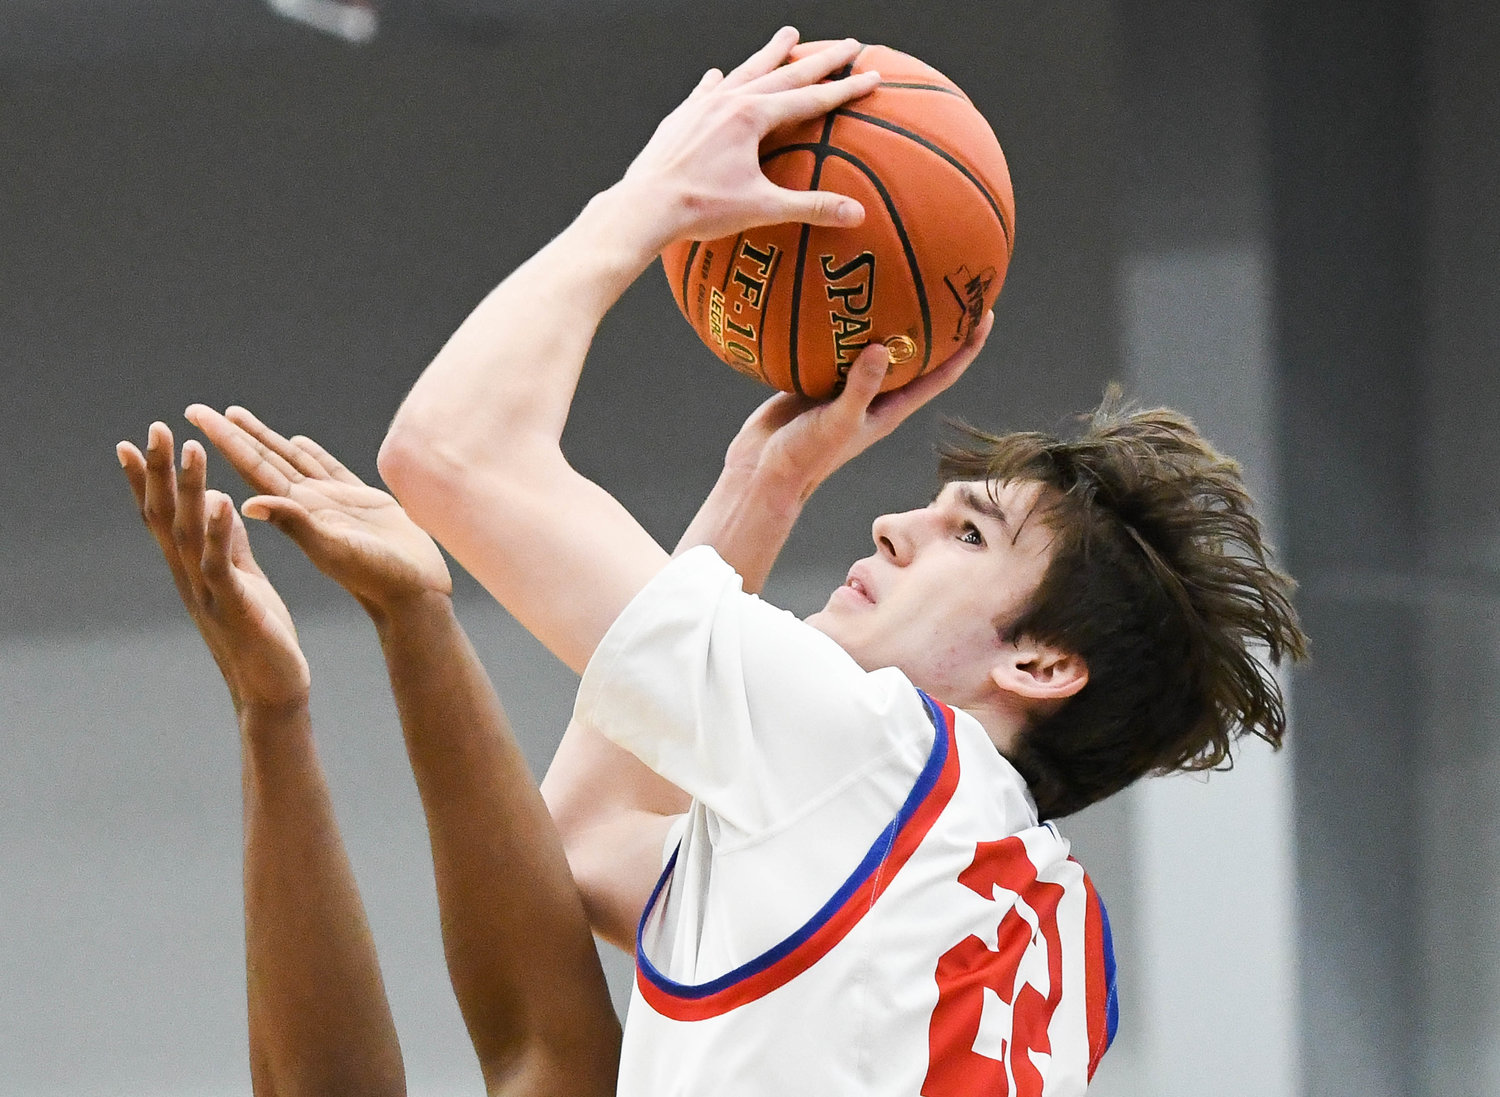 GOING UP -- New Hartford player Colton Suriano (22) attempts a layup during the Section III Class A final against Syracuse Academy of Science on Sunday at SRC Arena. Suriano had nine points in New Hartford's 65-61 overtime win.